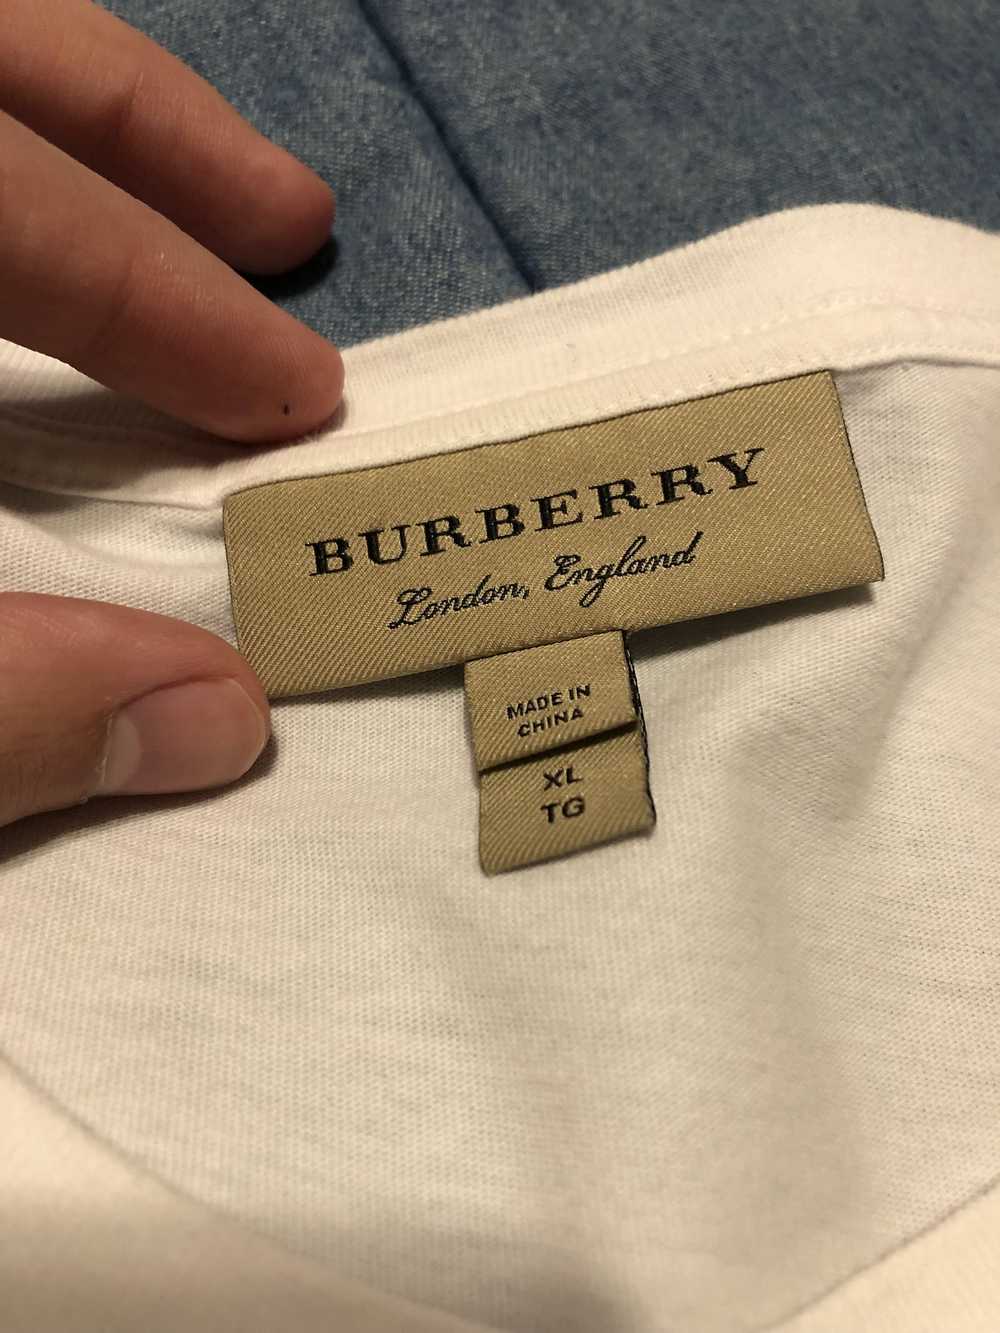 Burberry Burberry Thumbs Up T-Shirt - image 4